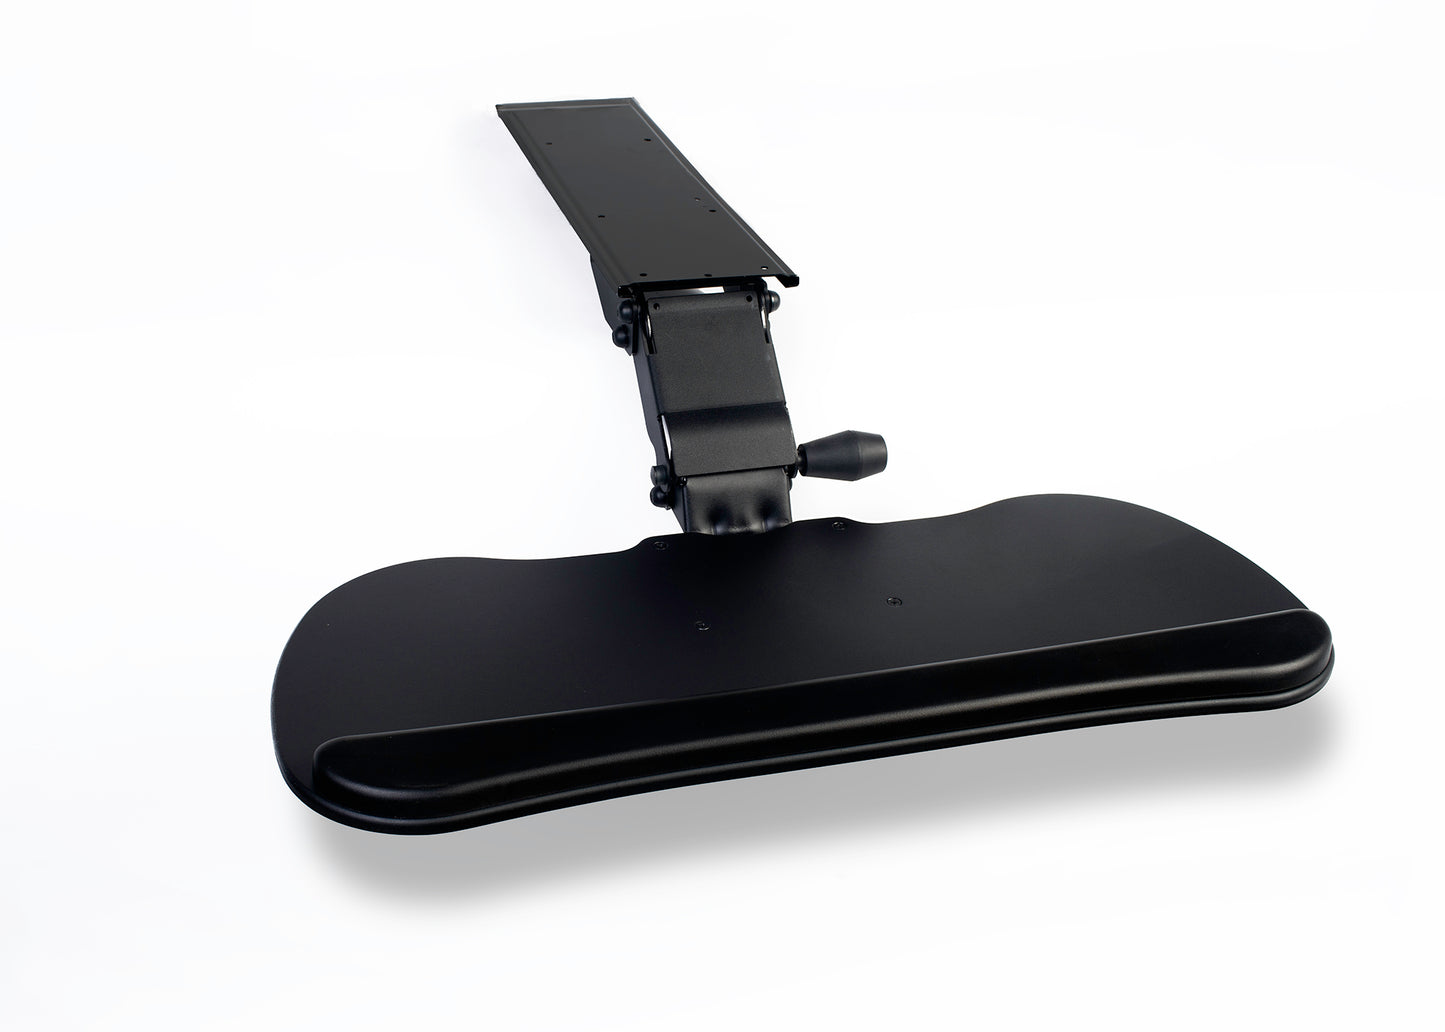 EasyLift Palmrest - Magnetic Attachment for Keyboard Tray